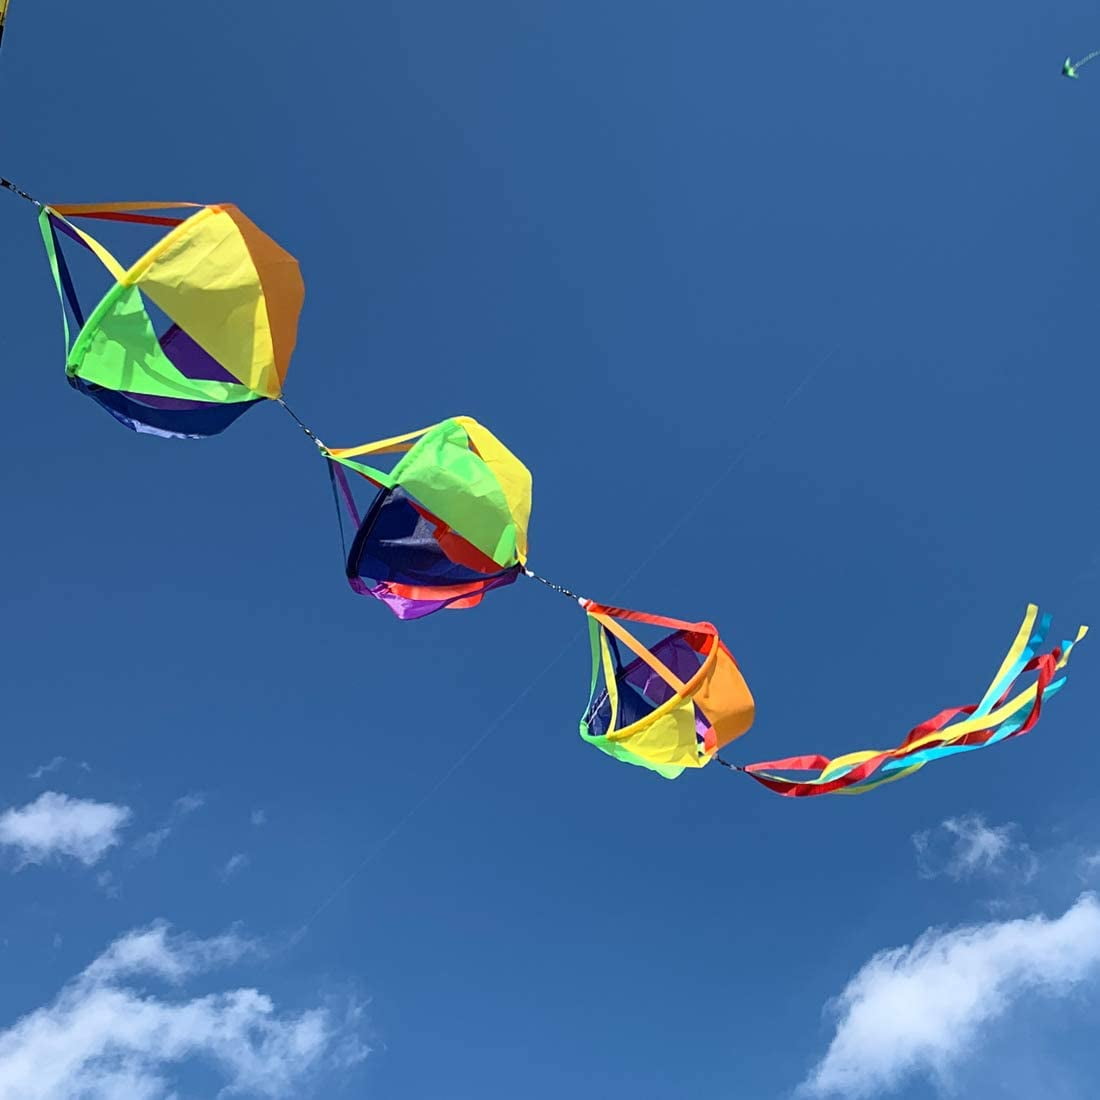 2pcs Vivd Flying Fish WINDSOCK Single Line Kites Outdoor Toy Windmill Games 